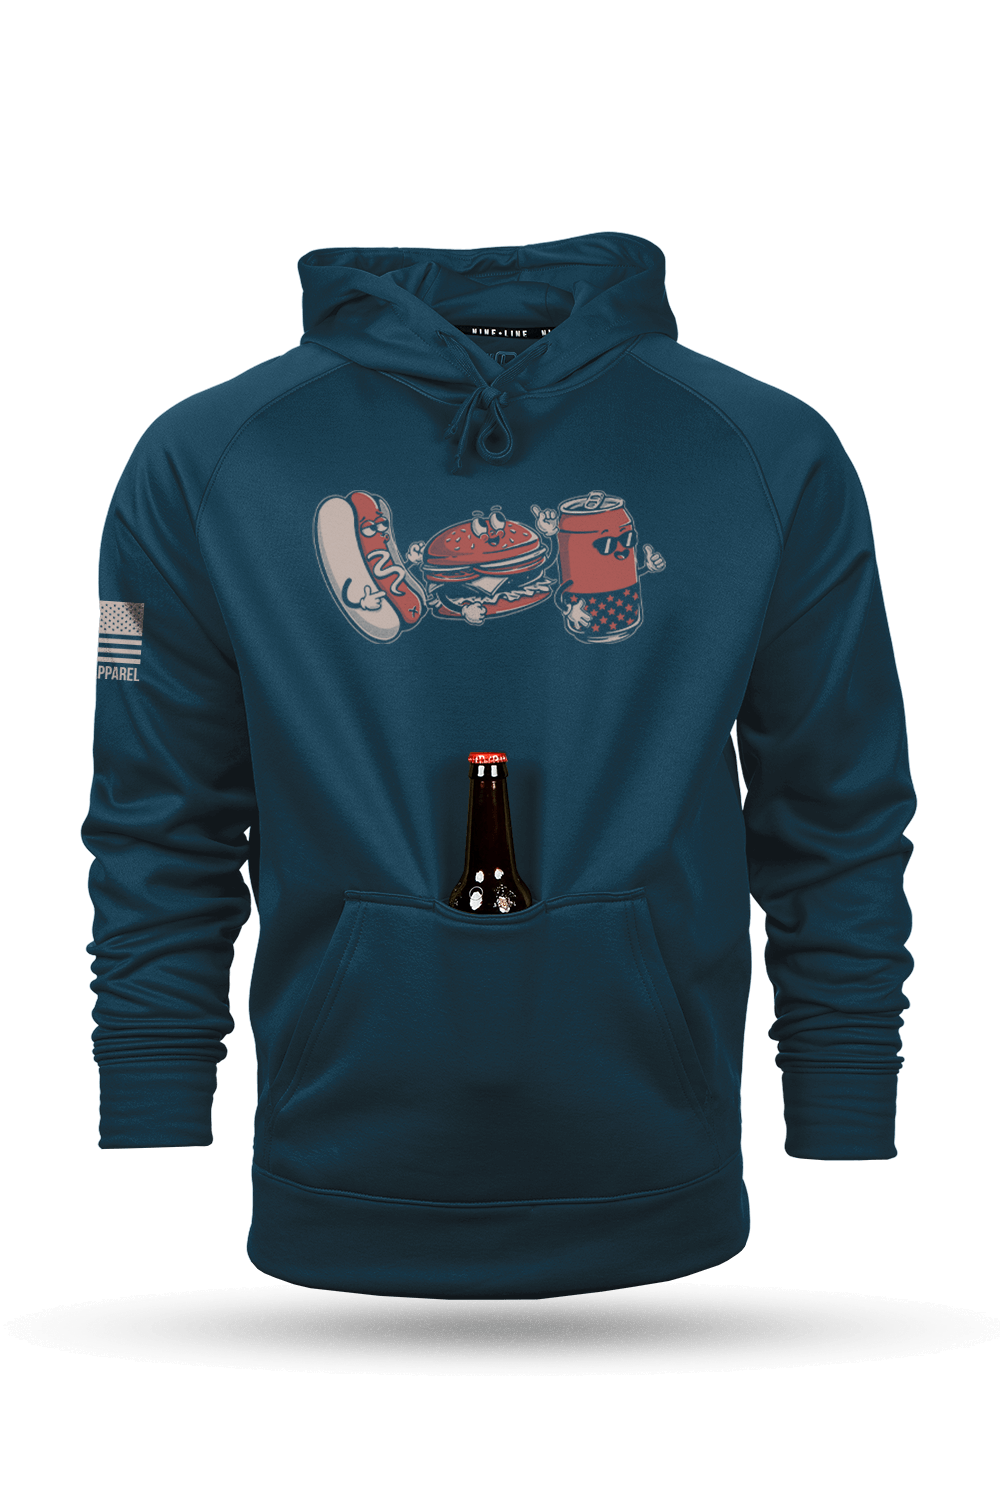 Raglan Tailgater Hoodie - Let's All Go To The BBQ